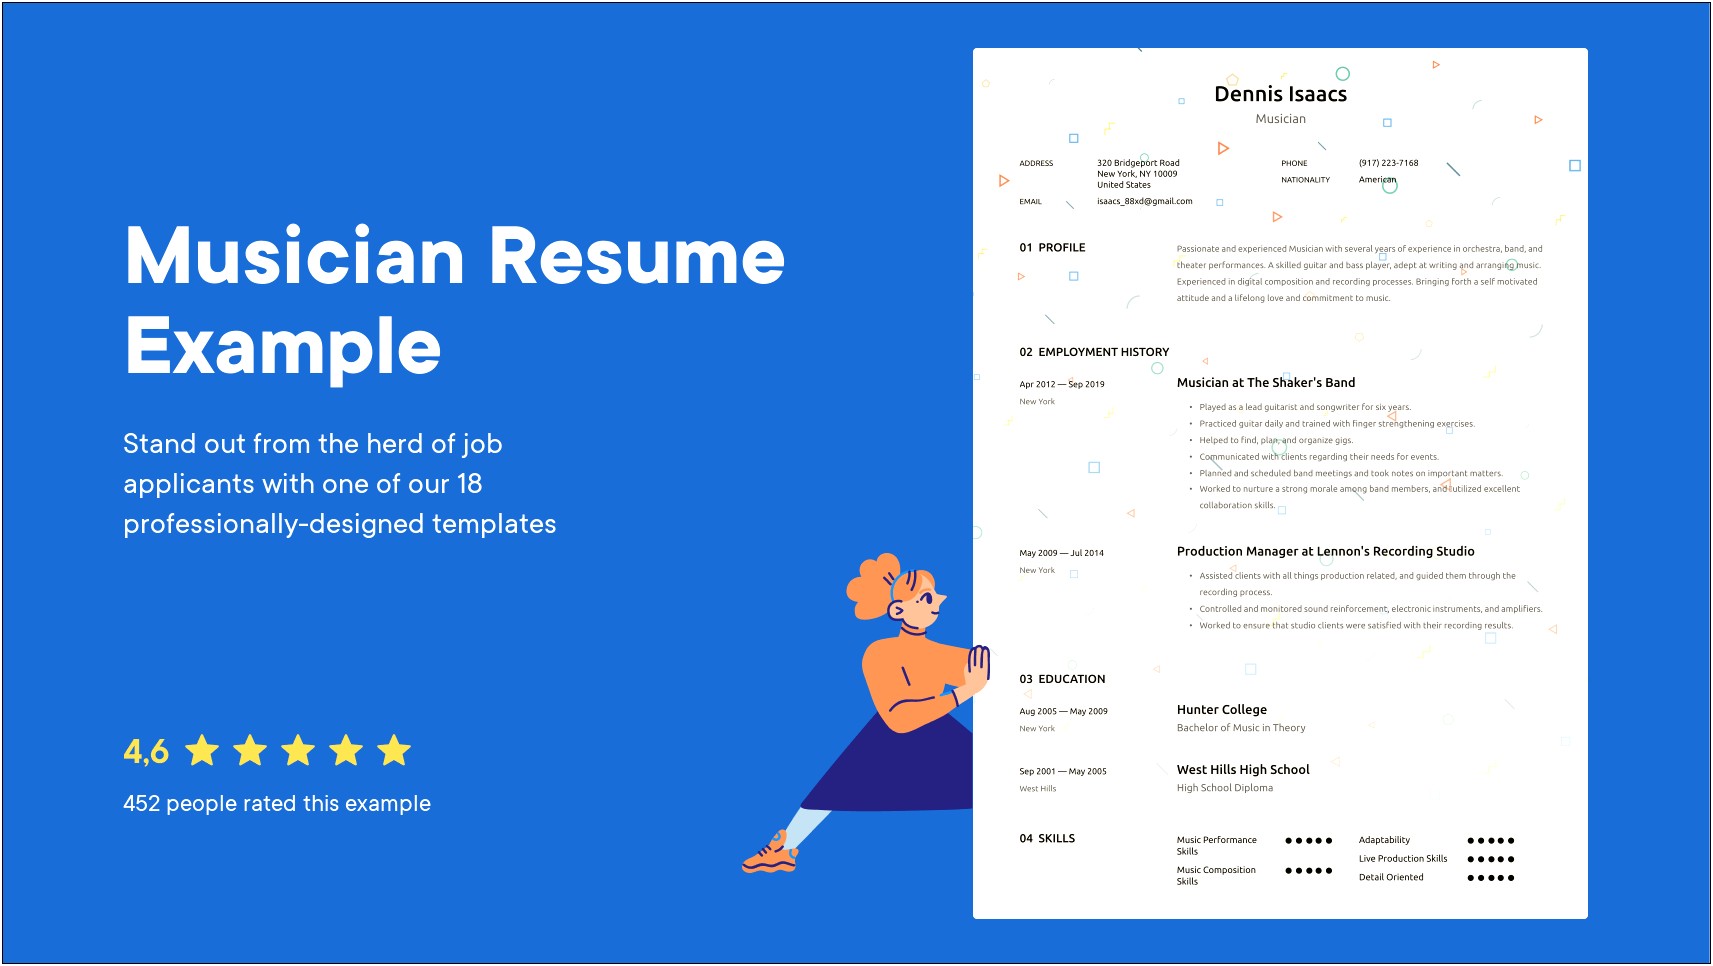 Example Of A Singer's Resume